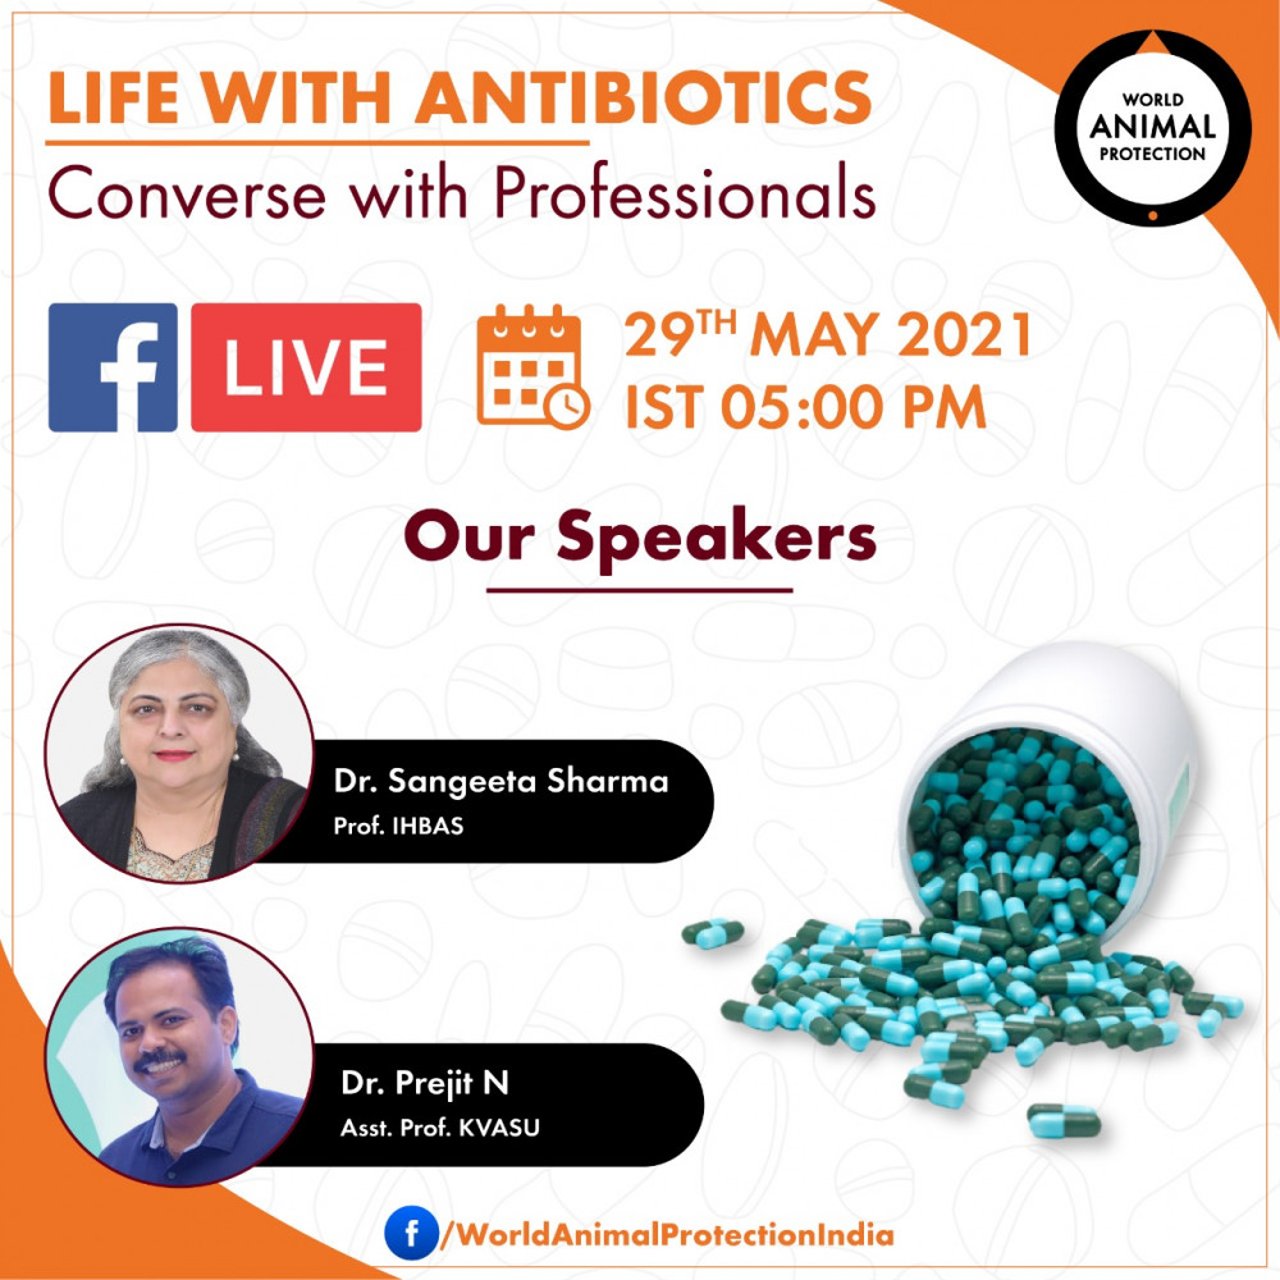 Life with antibiotics - Converse with Professionals 